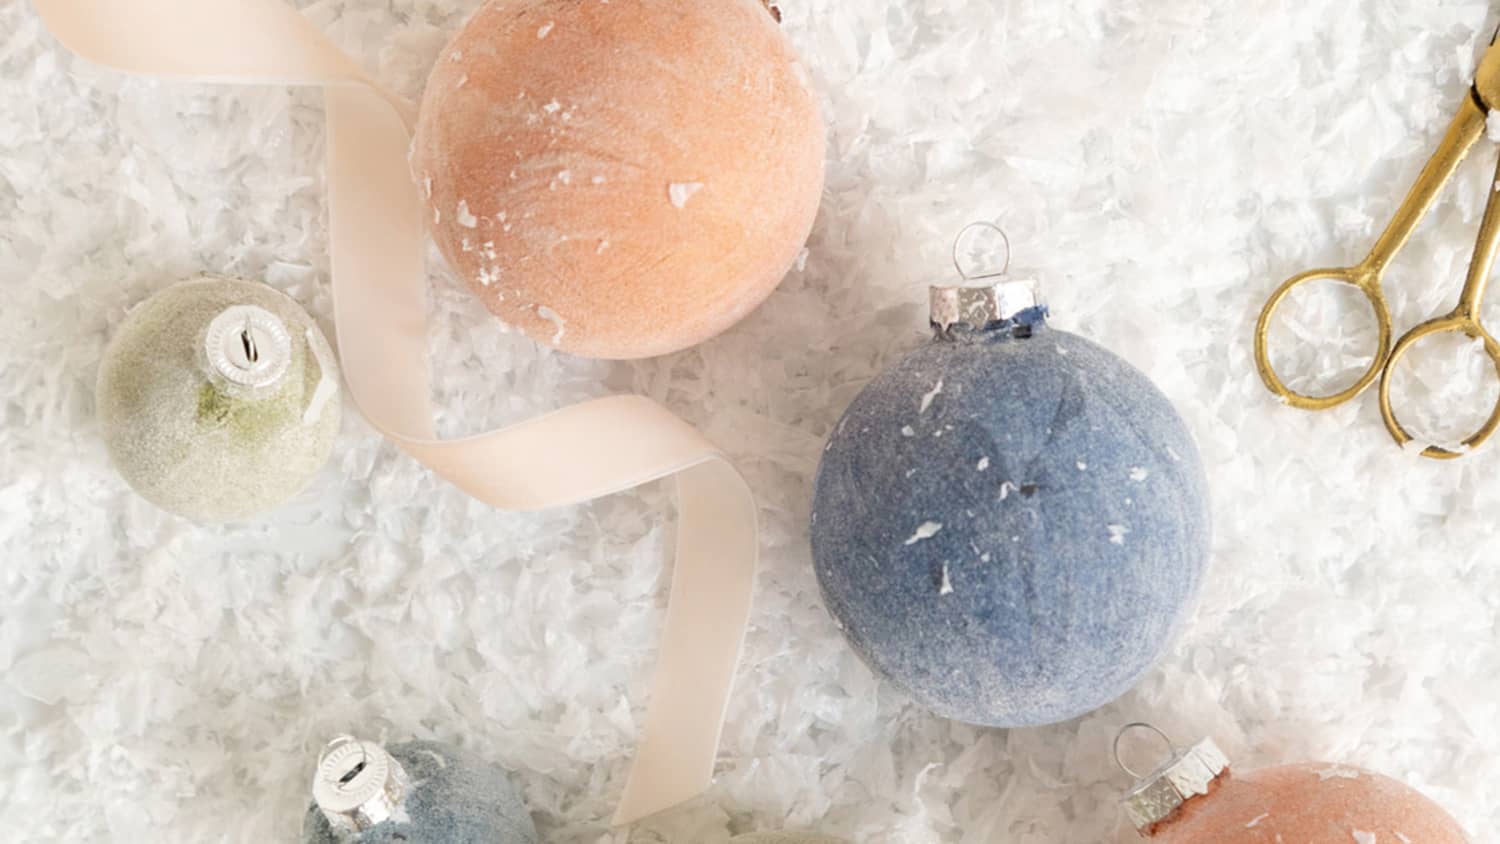 10 Gorgeous Homemade Ornaments You Can Make with Simple Glass